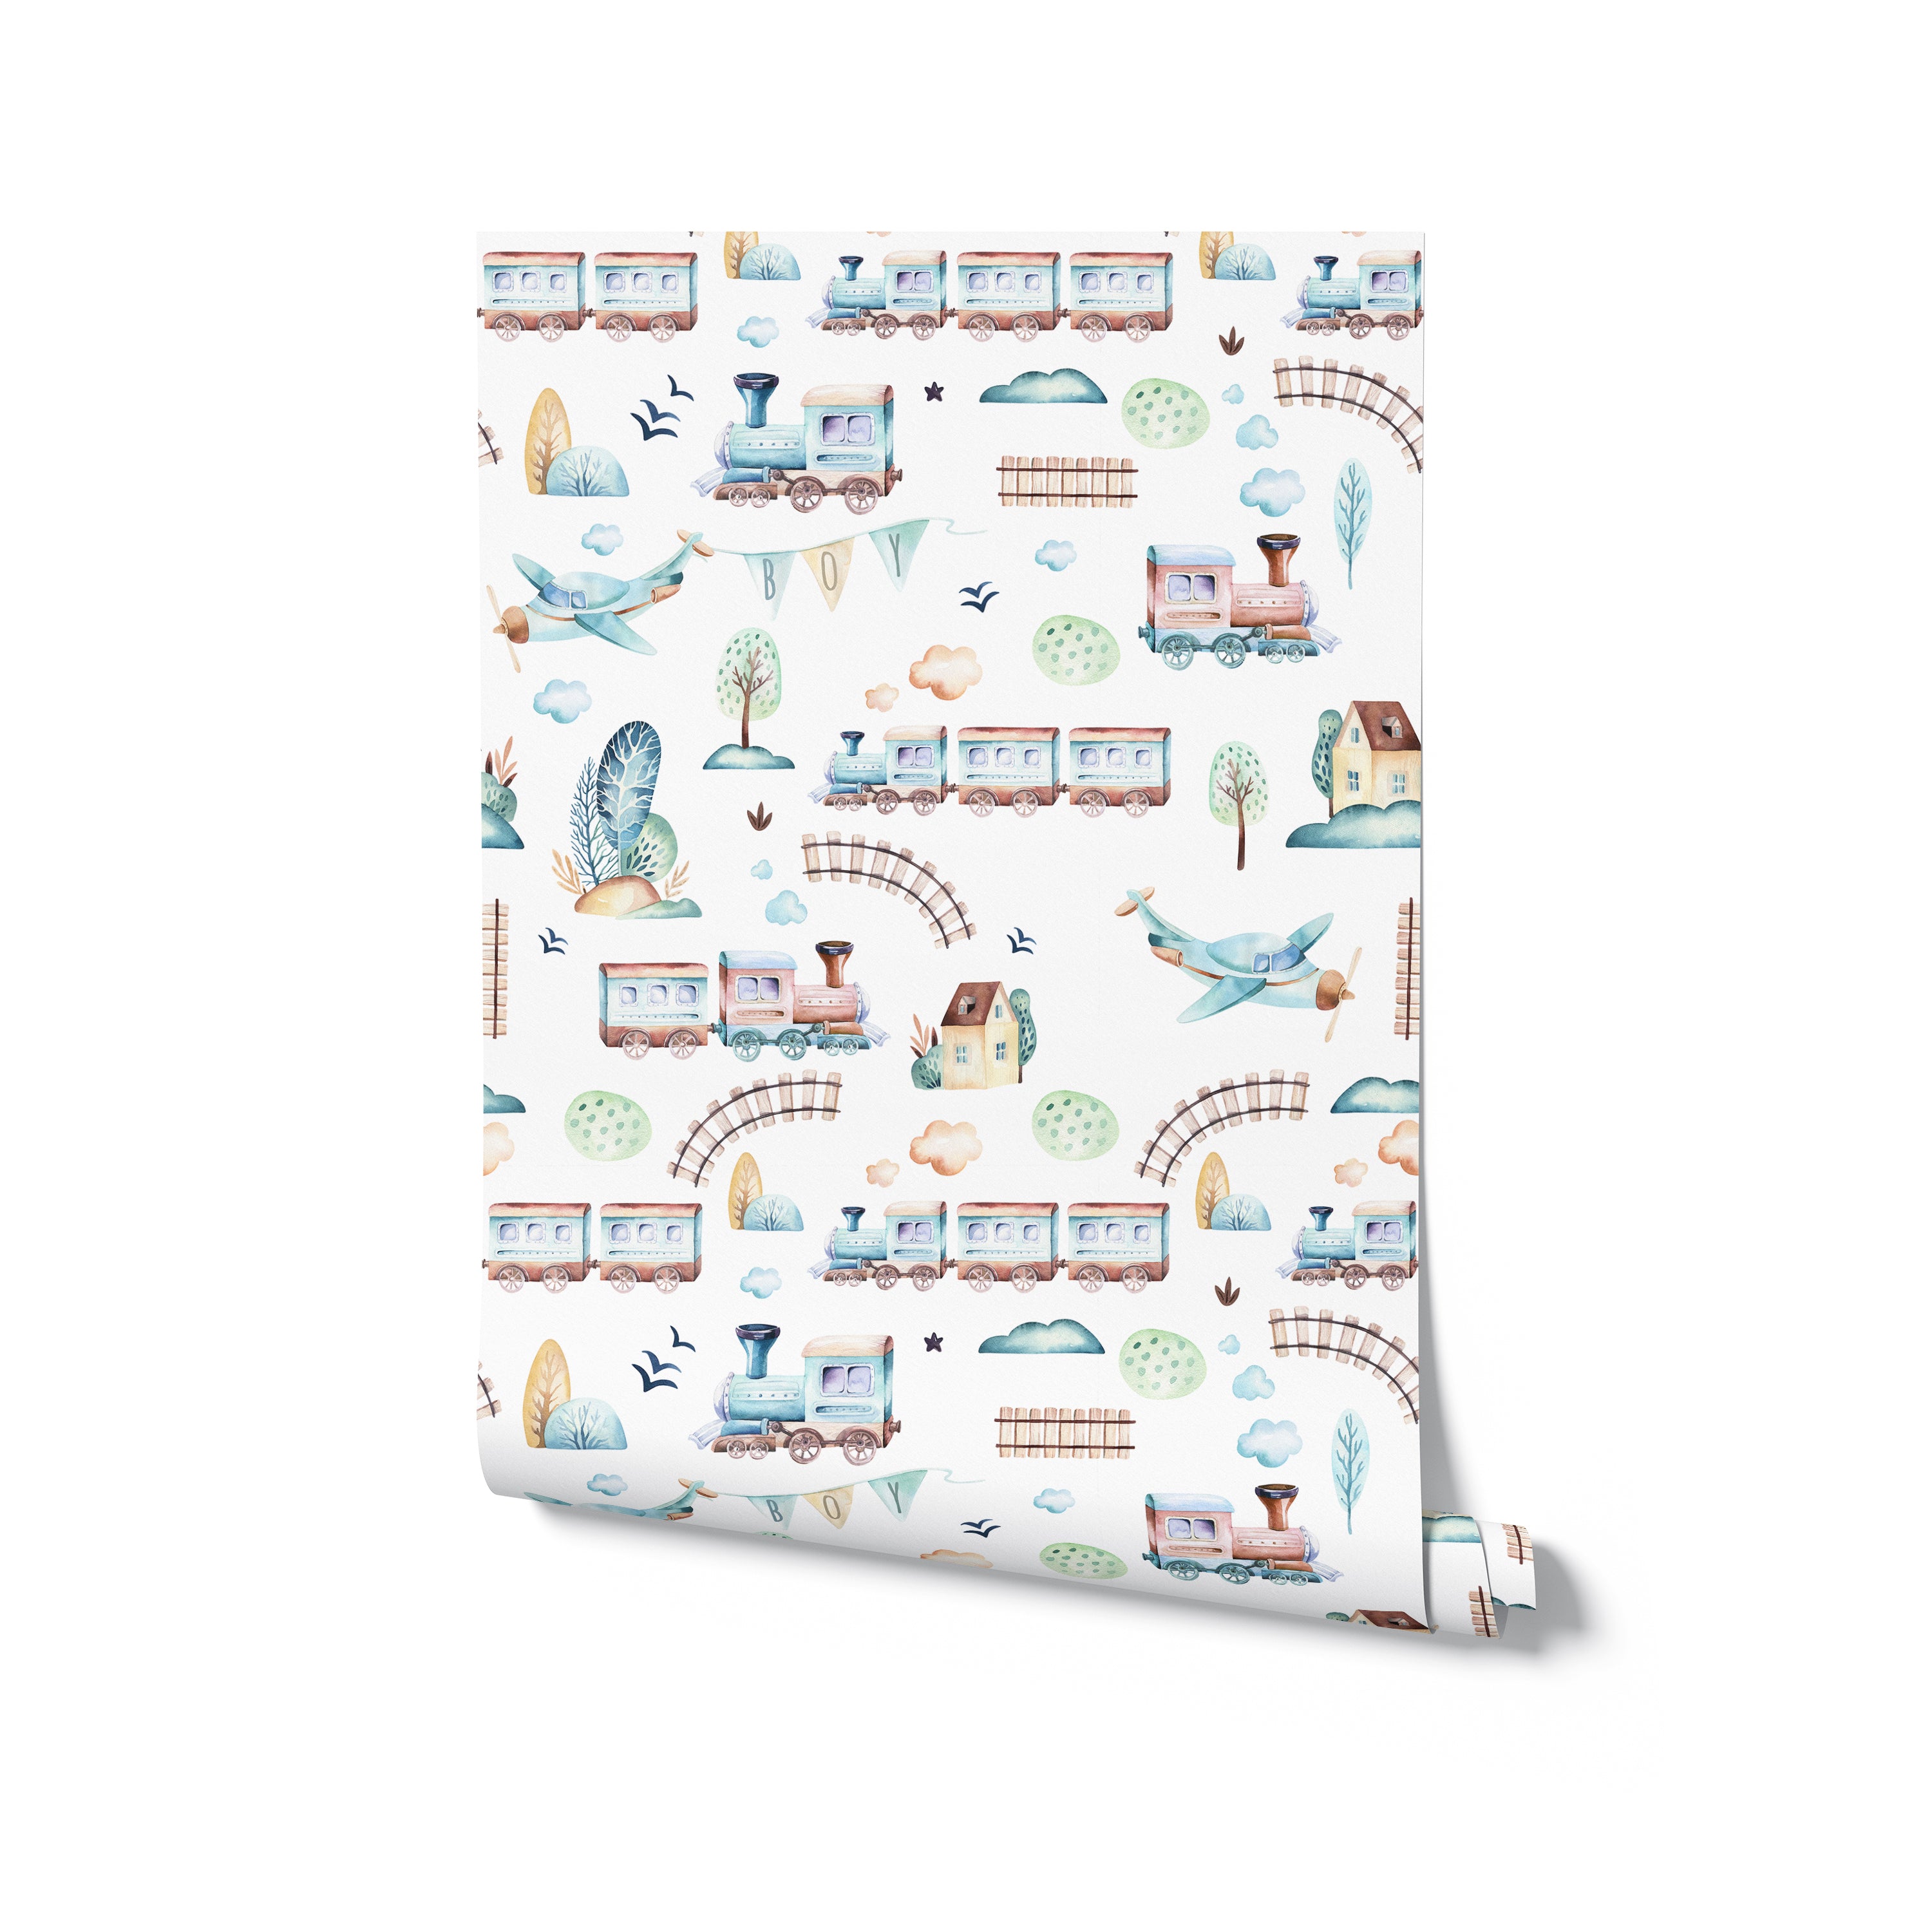 A lively children's play area adorned with 'Trains and Planes Kids Wallpaper II.' The wallpaper adds a touch of adventure with its depiction of trains and airplanes traveling through a colorful landscape of houses and trees, accompanied by fluffy clouds and playful details.